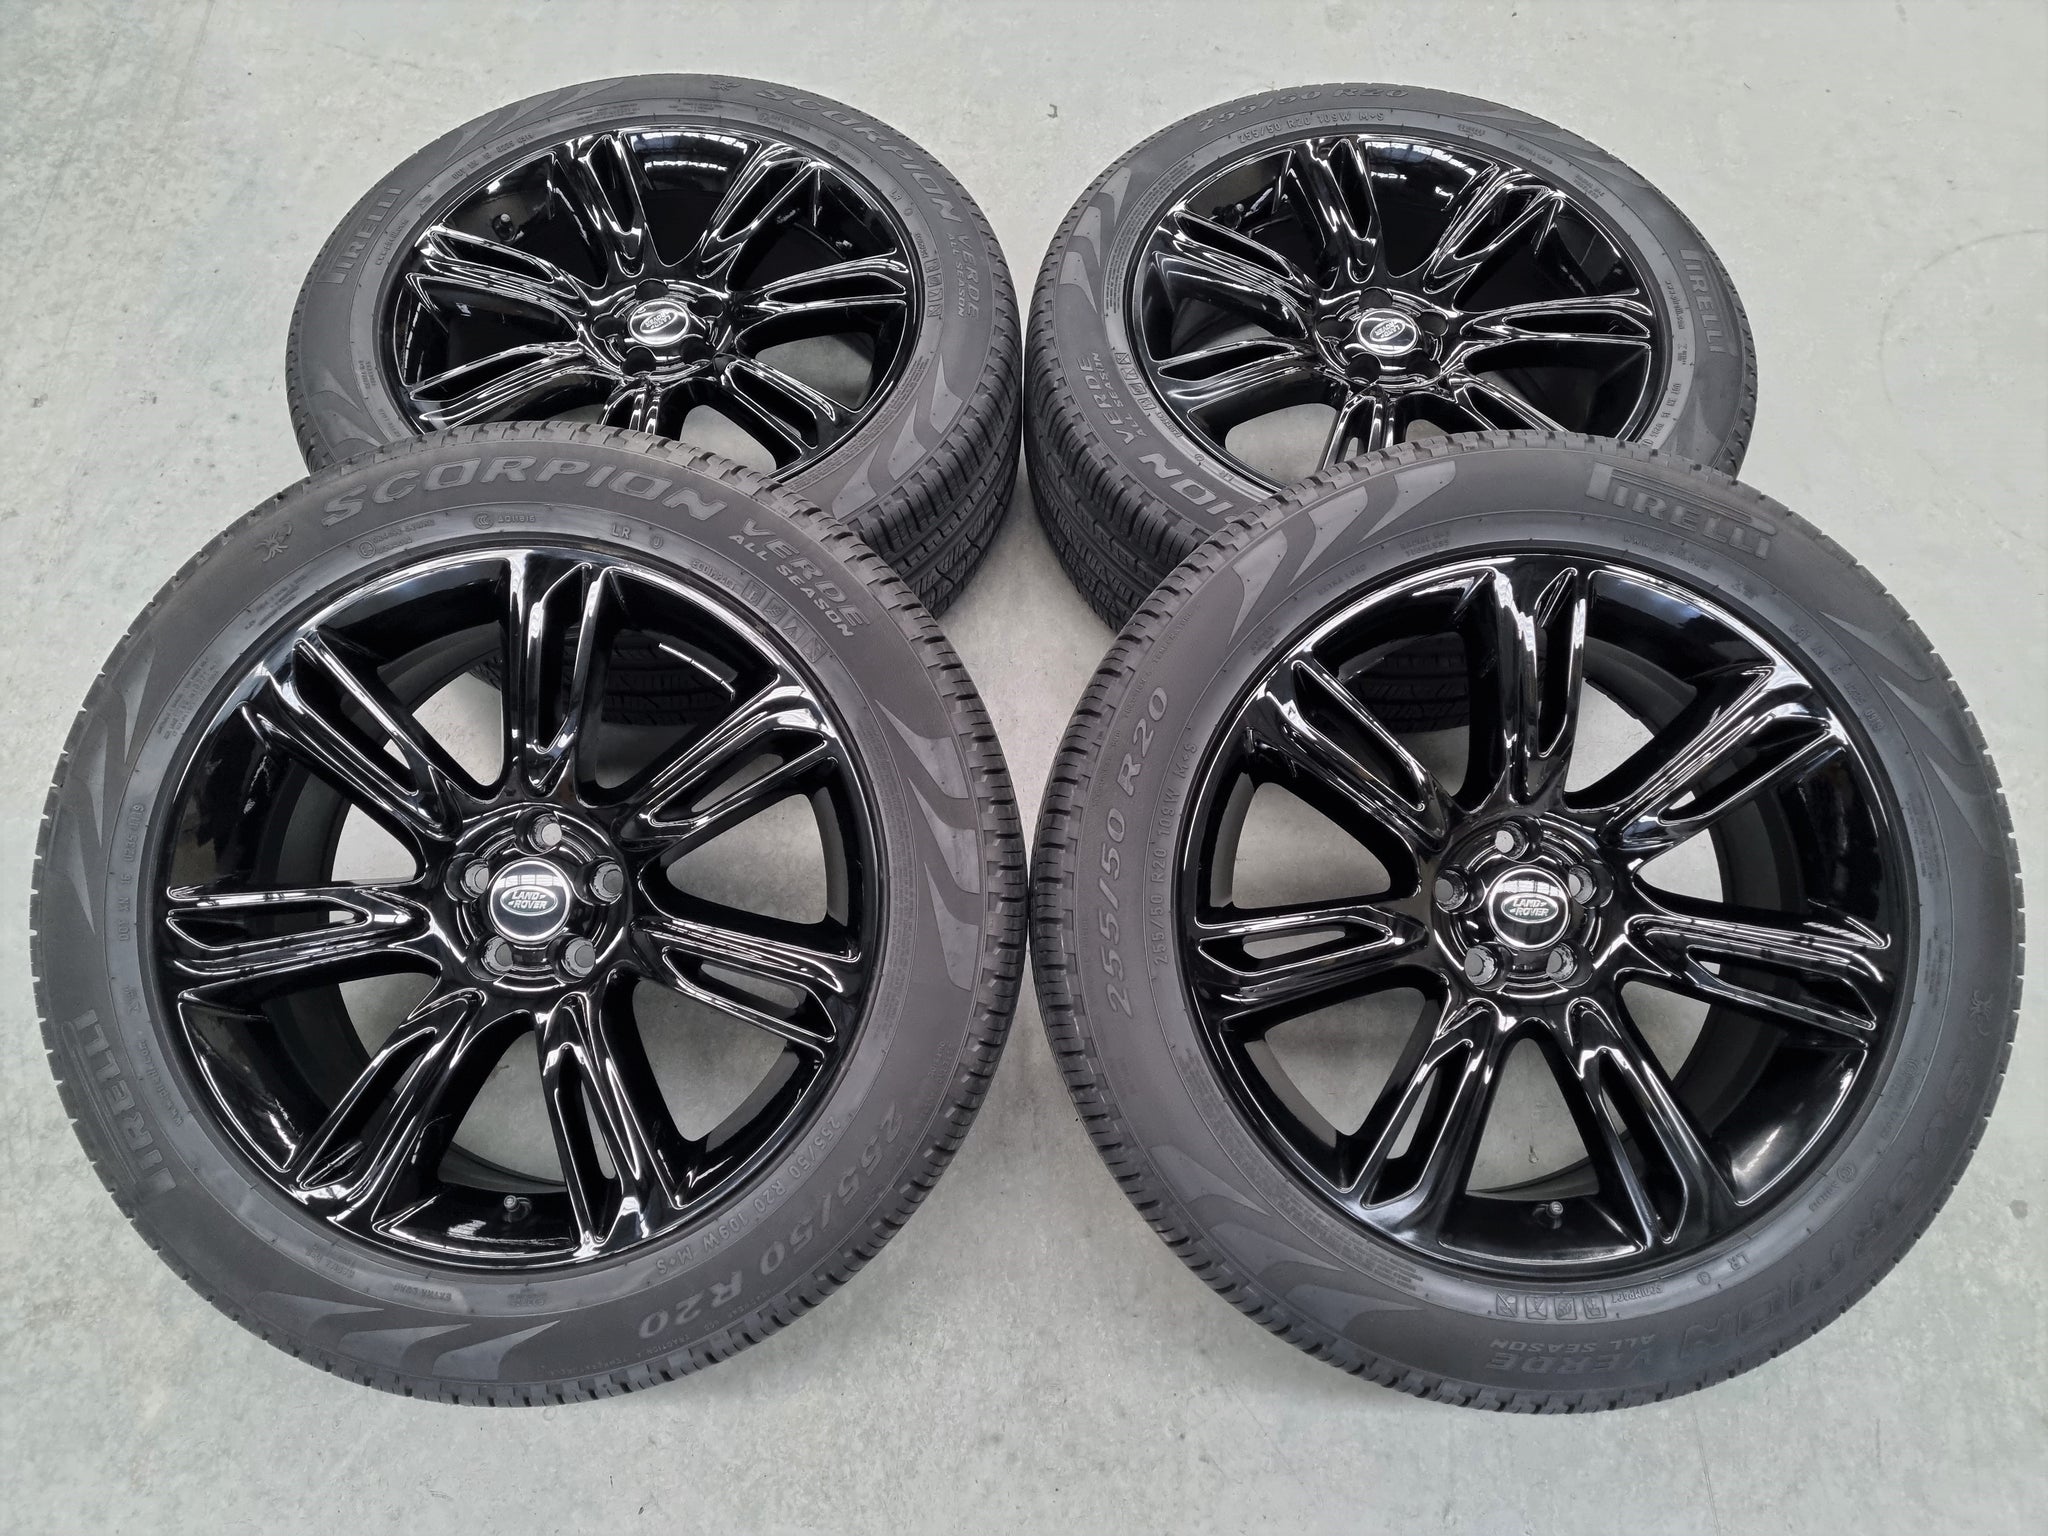 Load image into Gallery viewer, Genuine Range Rover Velar J8A2 20 Inch Wheels and Tyres Set of 4
